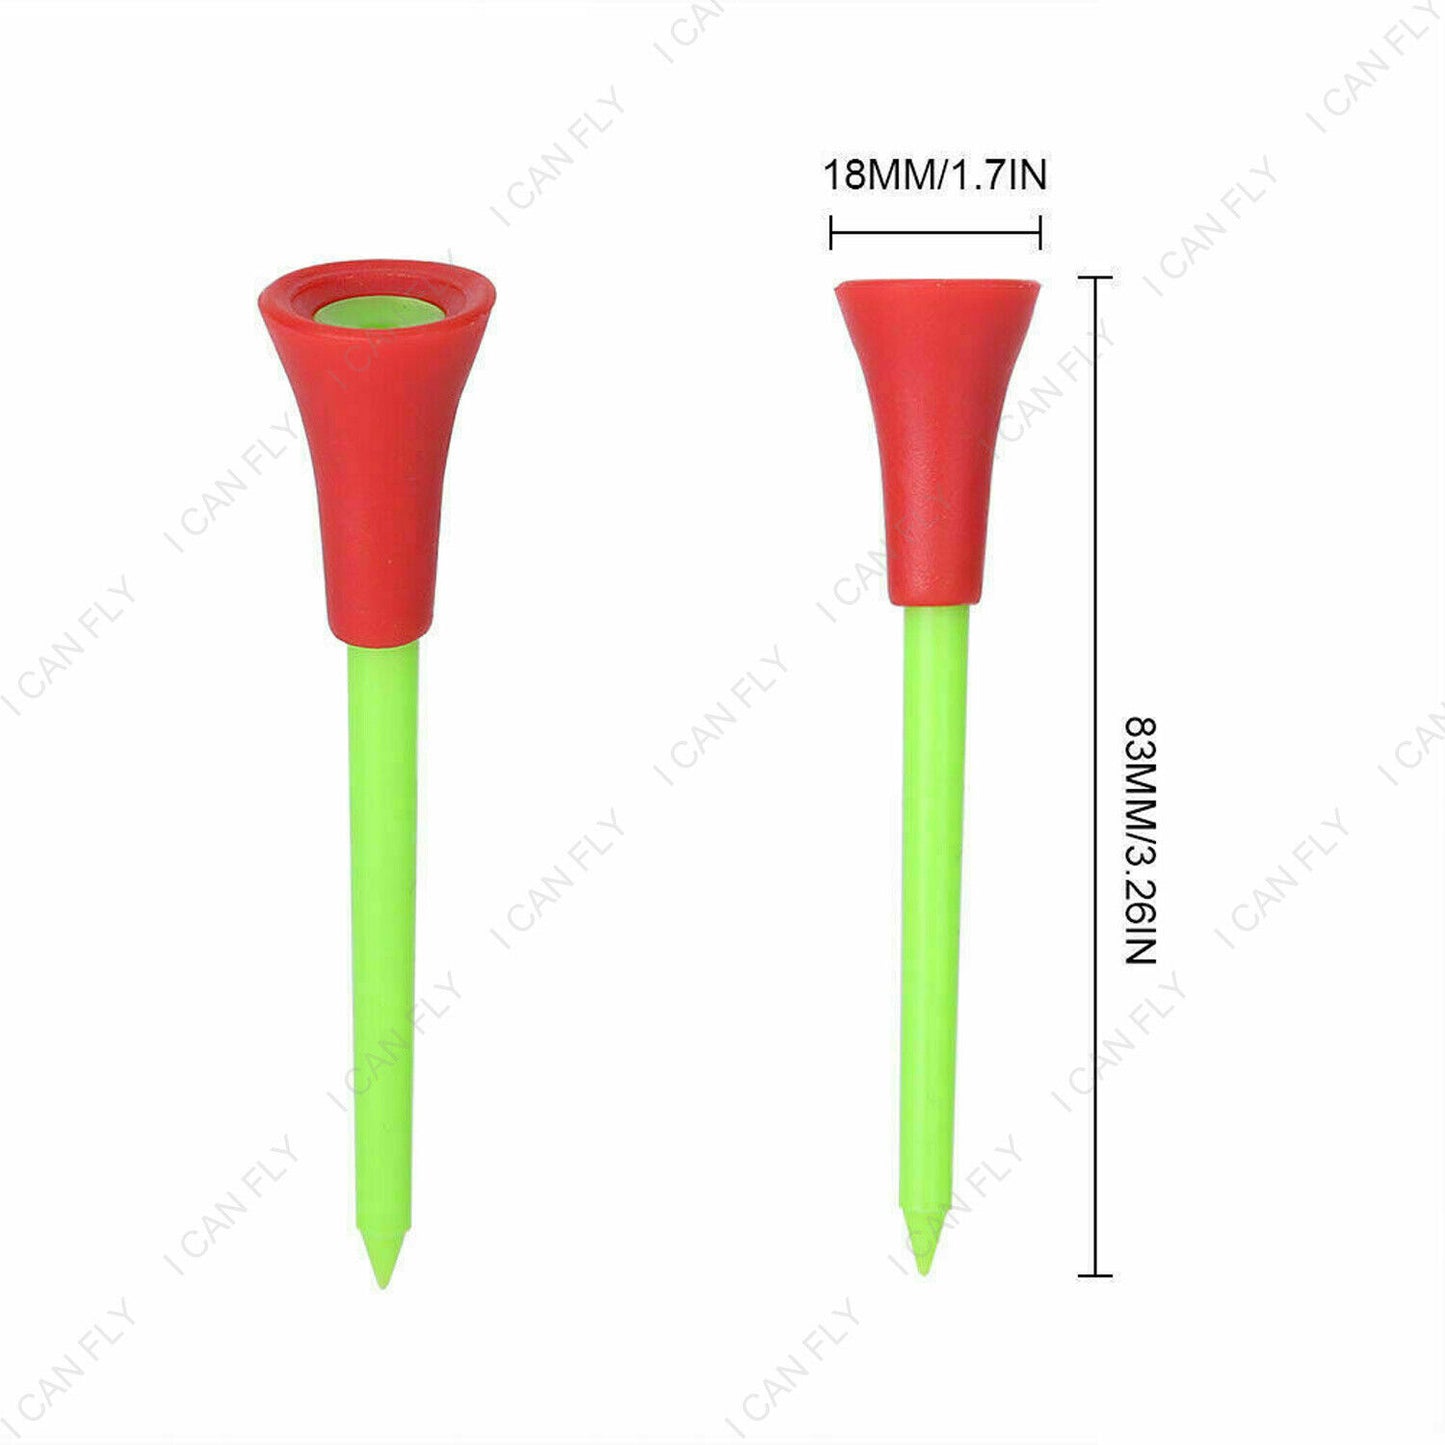 110x Golf Tees 83mm Multi Color Plastic With Rubber Cushion Top Quality